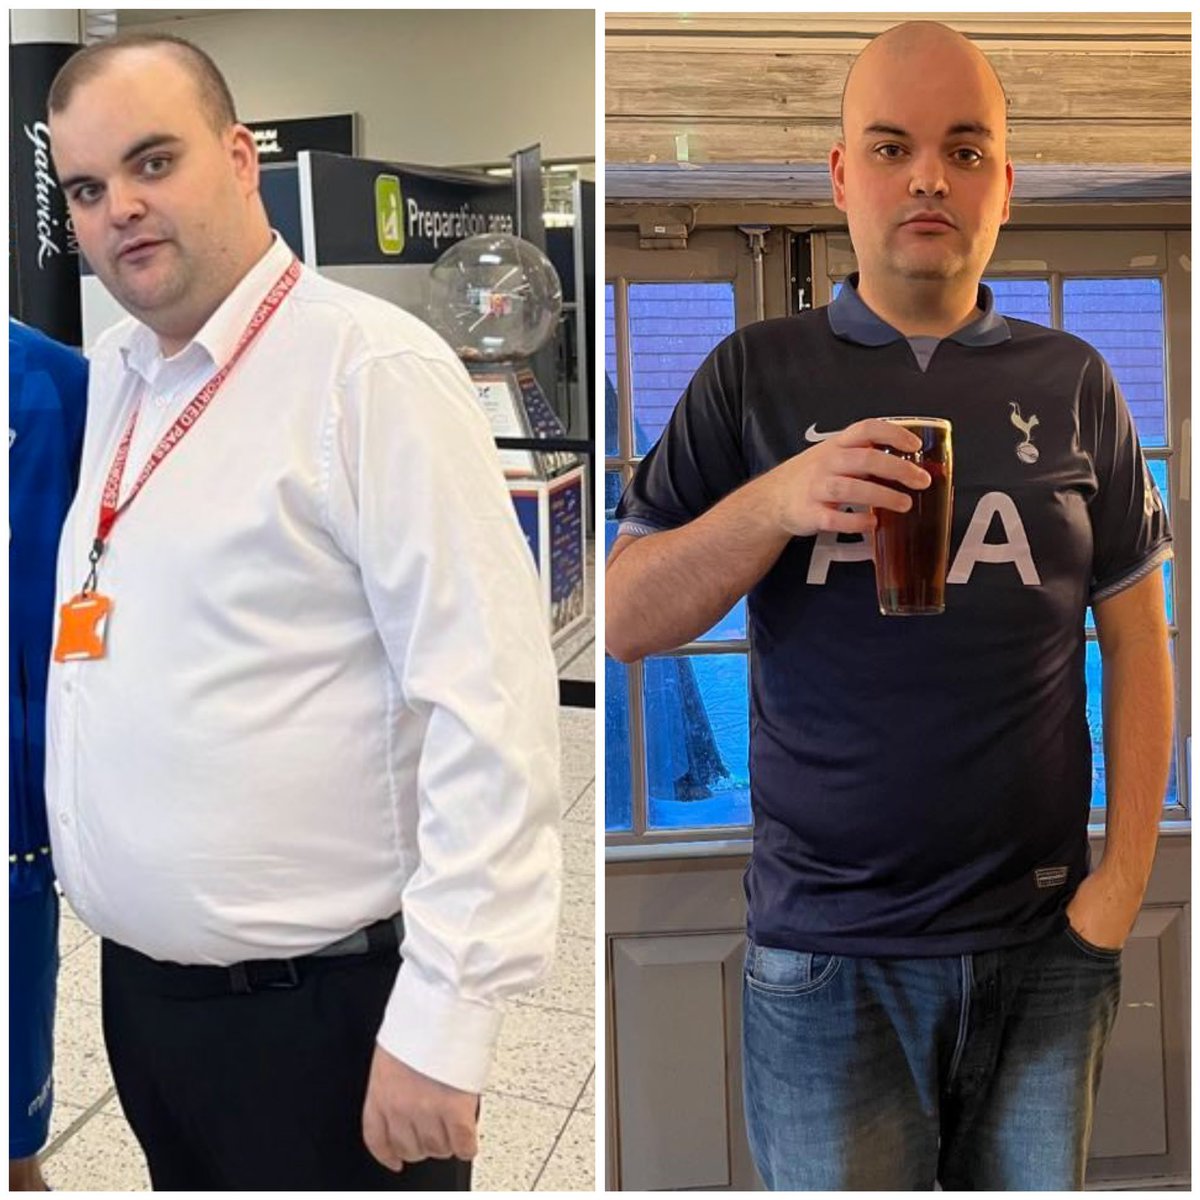 I’ve spoken recently about my recent weight loss journey with @SlimmingWorld, and regaining of my physical health, in response to troll’s comments about my appearance. /1